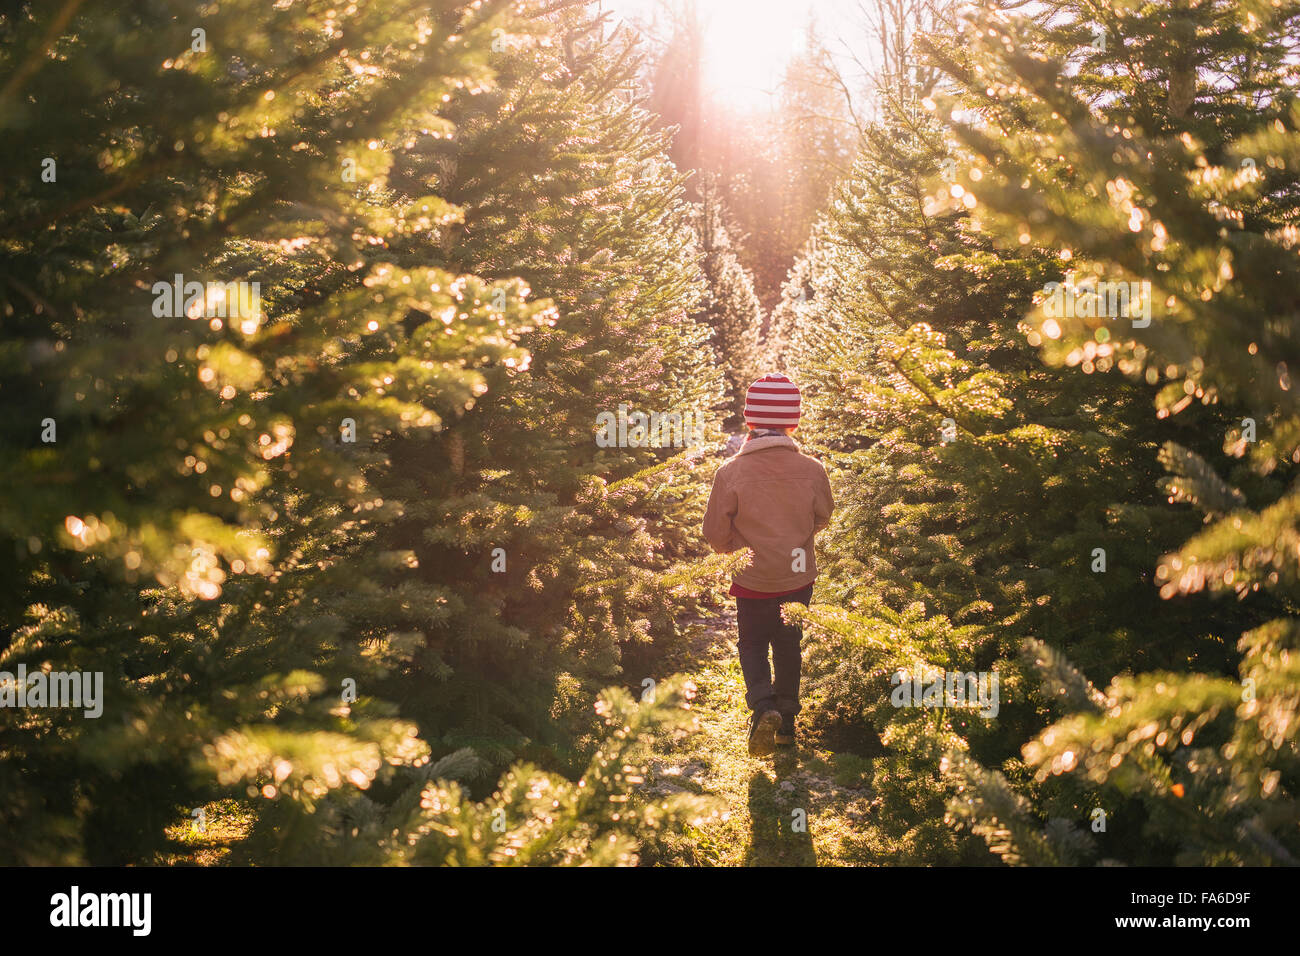 Boy walking between two rows of trees at a Christmas tree farm, United States Stock Photo